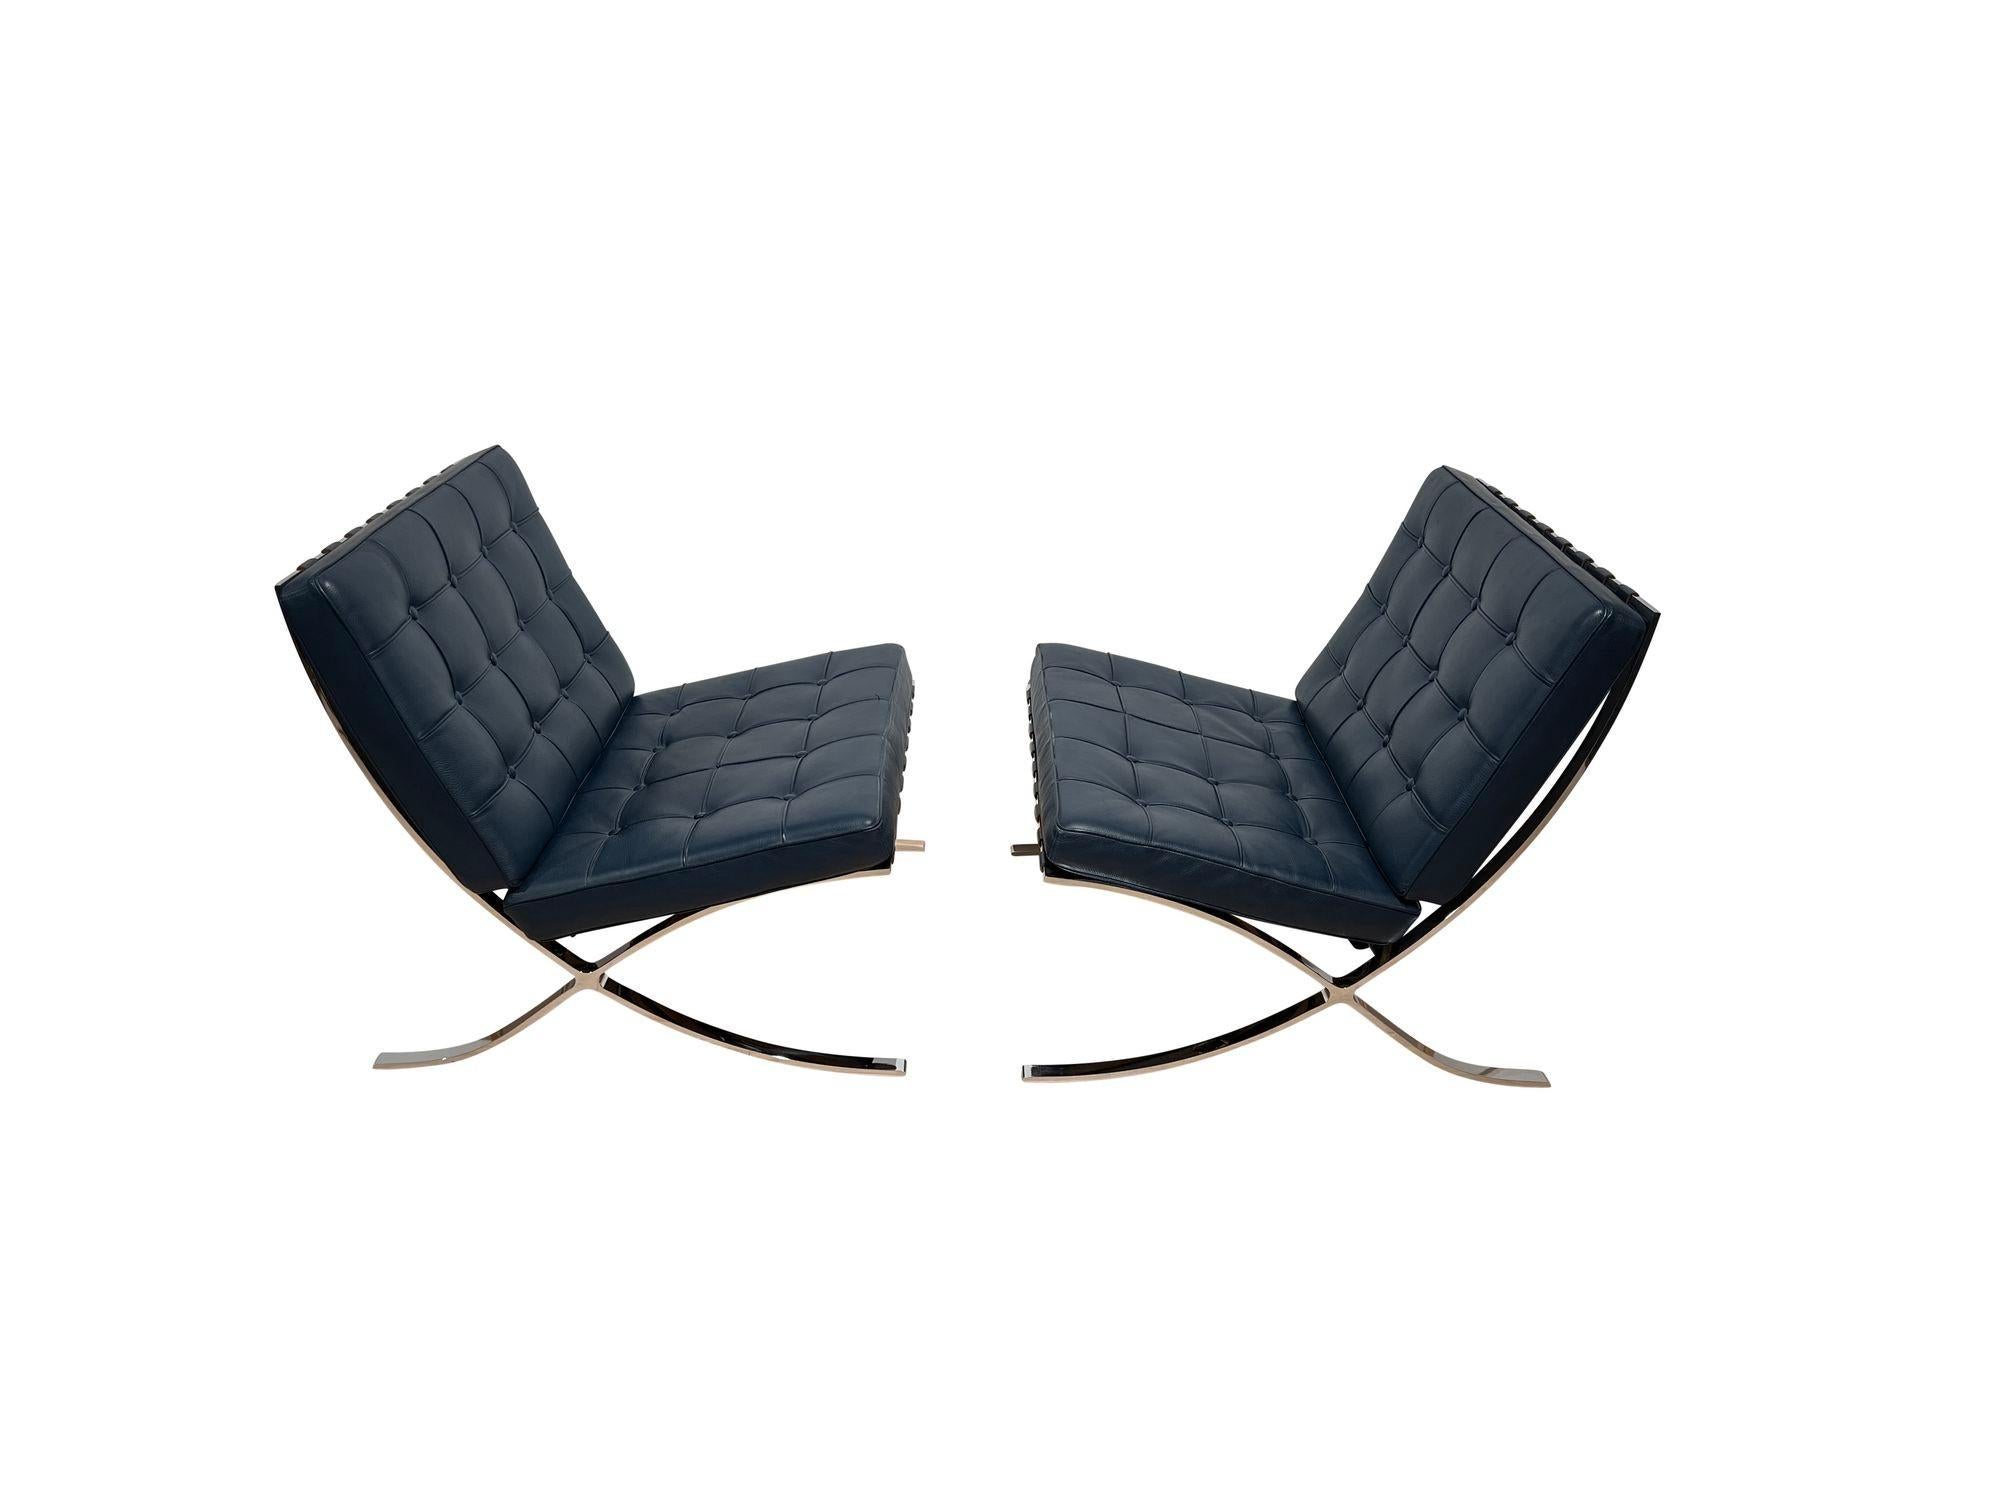 Well preserved pair of Barcelona Chairs from the 1970s.
Chrome-plated flat steel and black leather. Design by Ludwig Mies van der Rohe, 1929 for the German pavilion at the world exhibition in Barcelona.
Very good original condition. As one of the